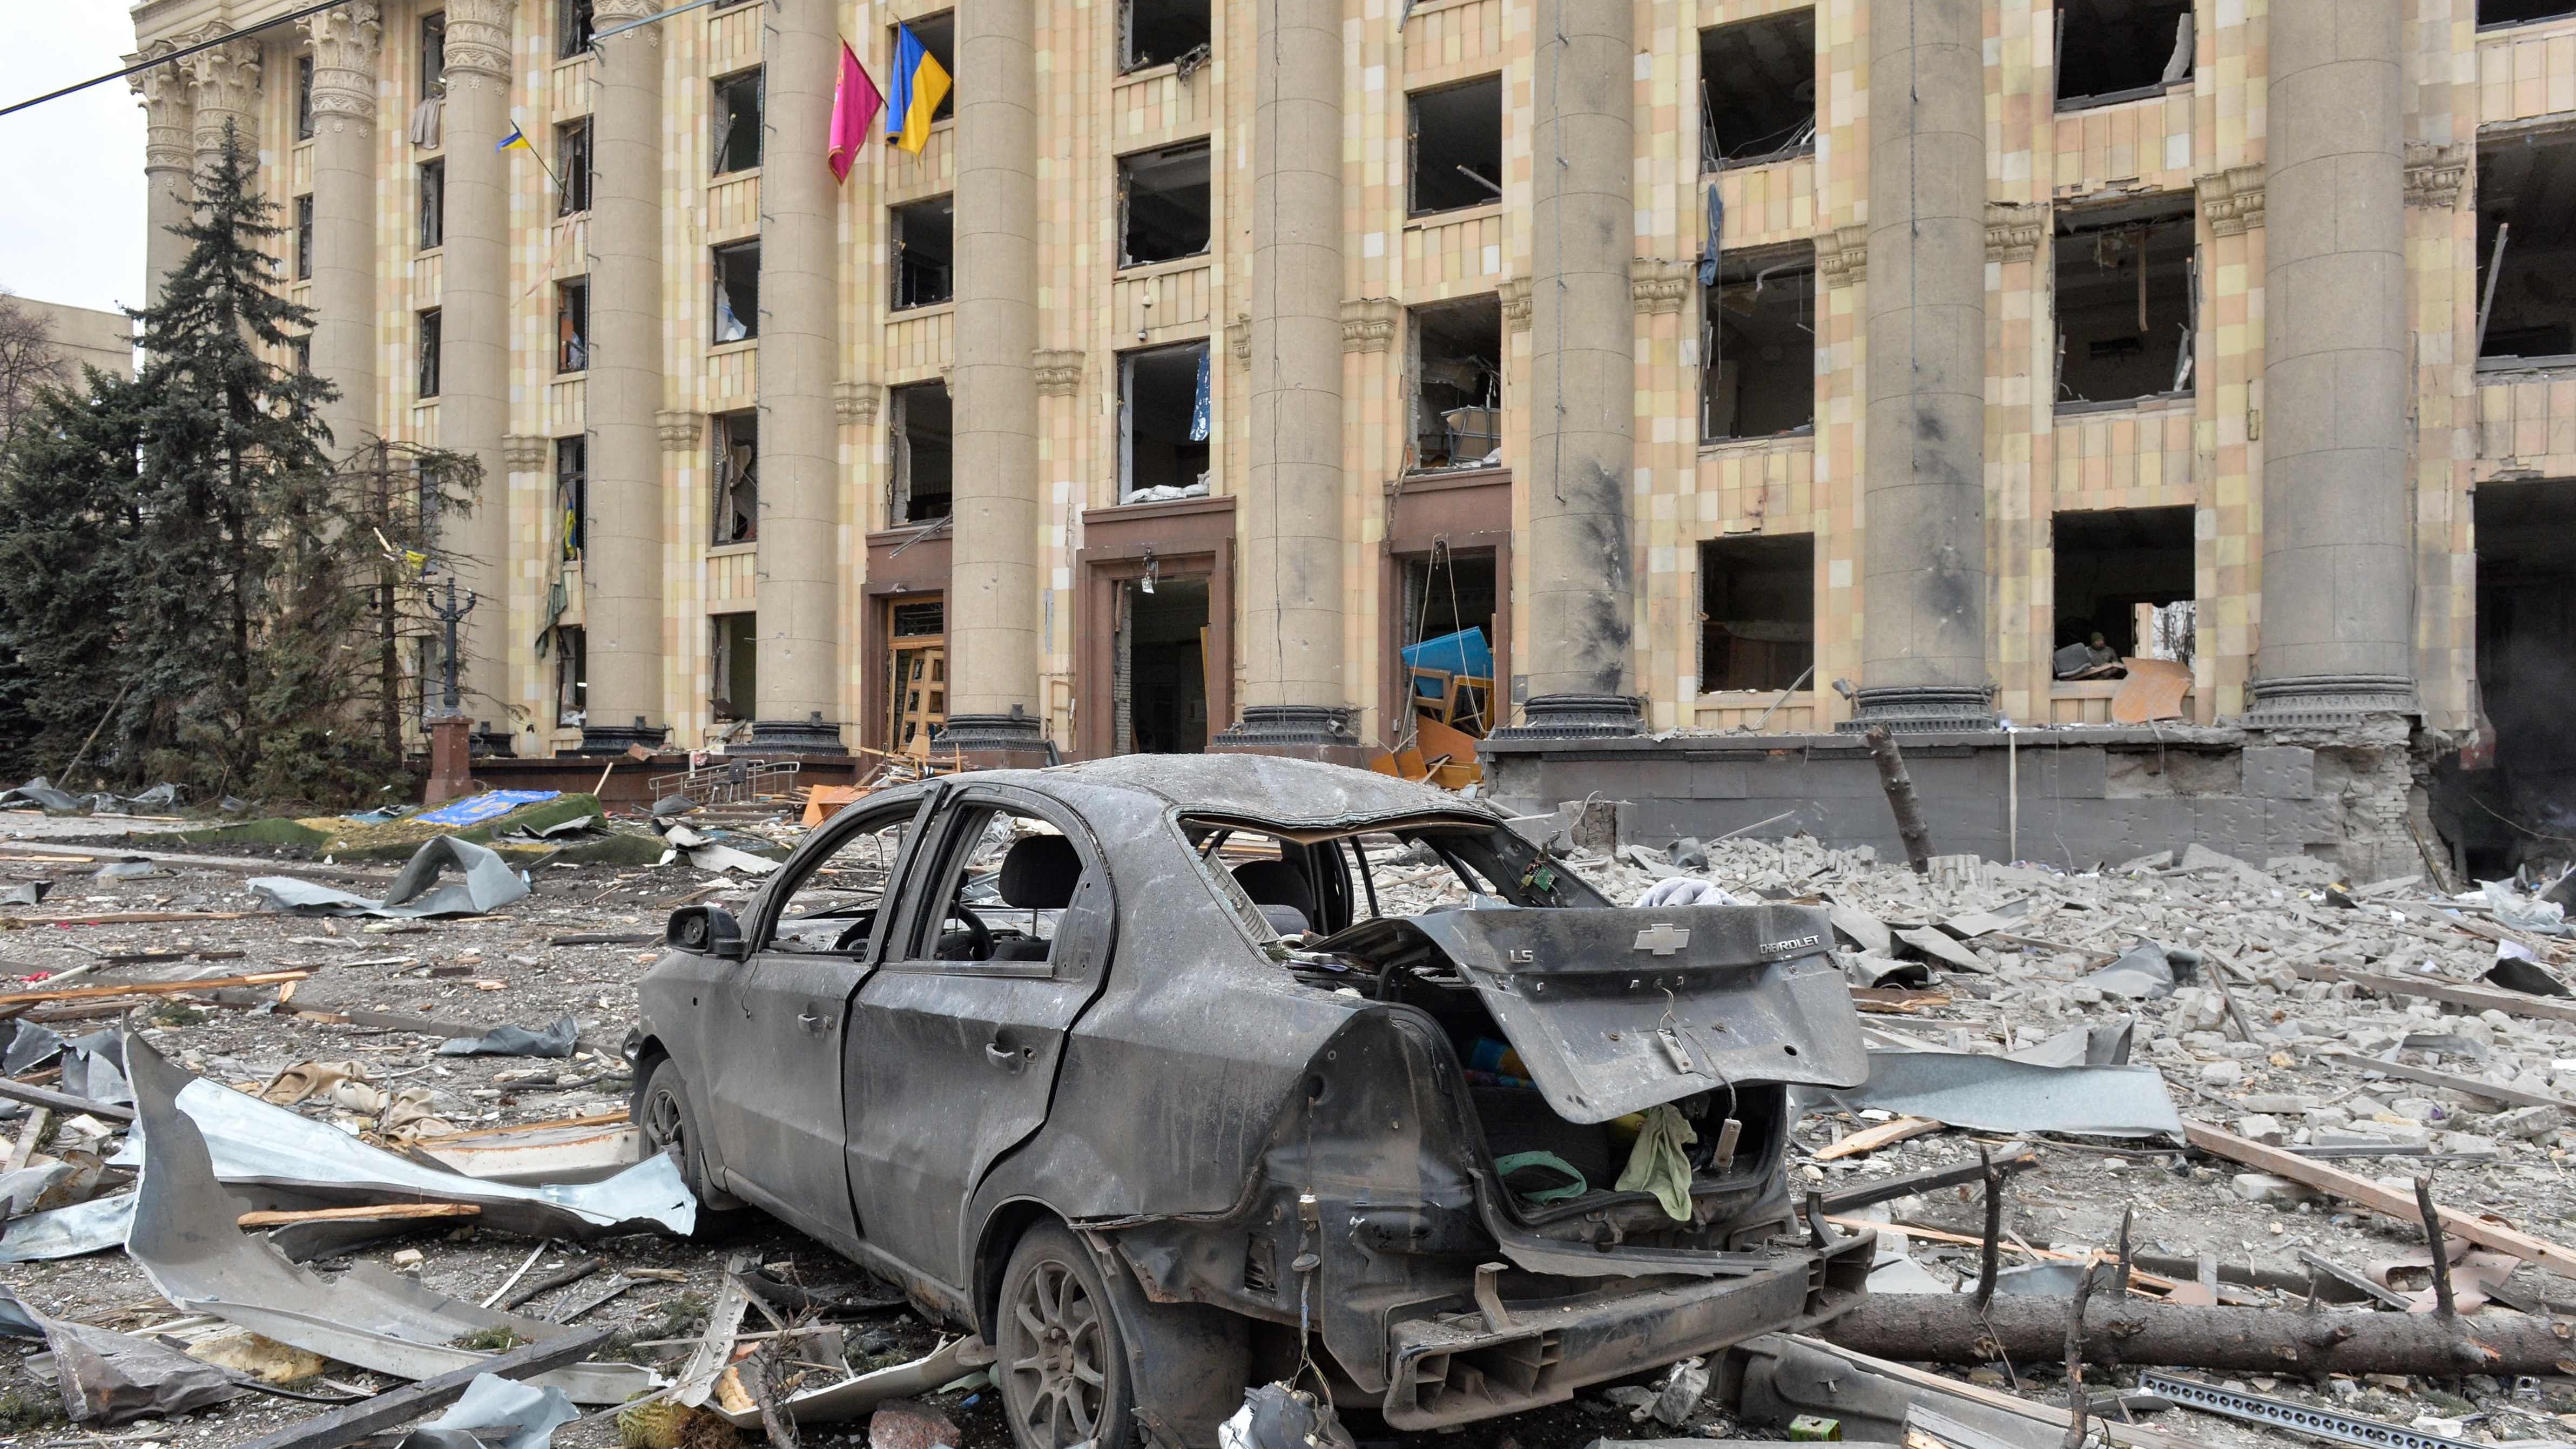 The central square of Ukraine's second city, Kharkiv, was shelled by advancing Russian forces who hit the building of the local administration, regional governor Oleg Sinegubov said. Credit: AFP Photo